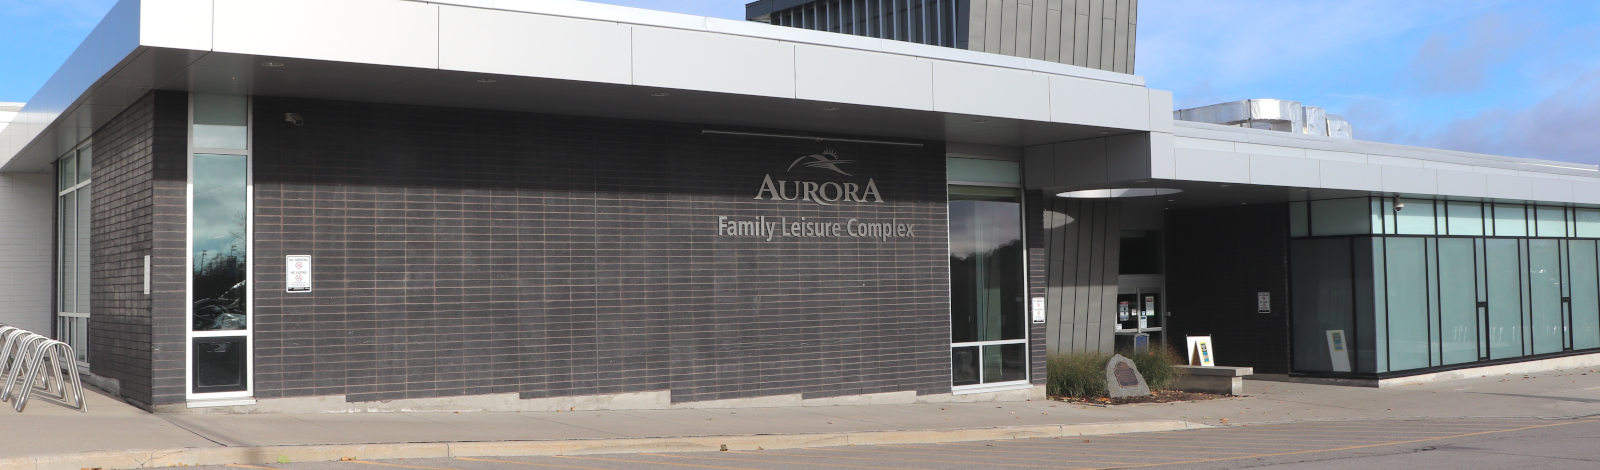 Front of building Aurora Family Leisure Complex